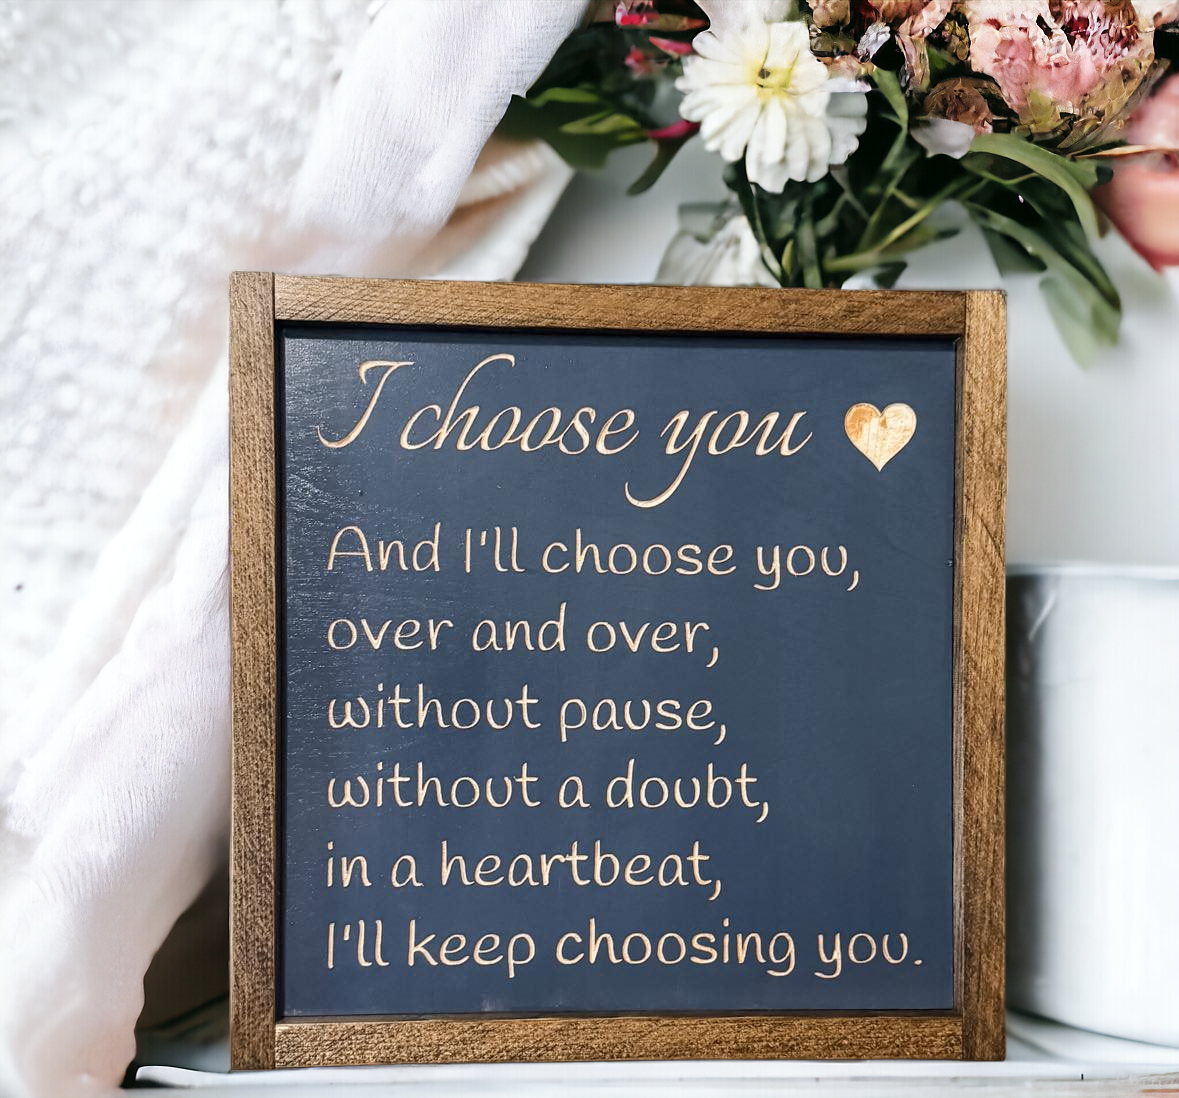 I Choose You" Framed Wood Sign: Heartfelt message on natural wood against bluish gray background, framed in stained wood. Size: 11.5" x 11.5". Perfect for Valentine's Day, anniversaries, or weddings.